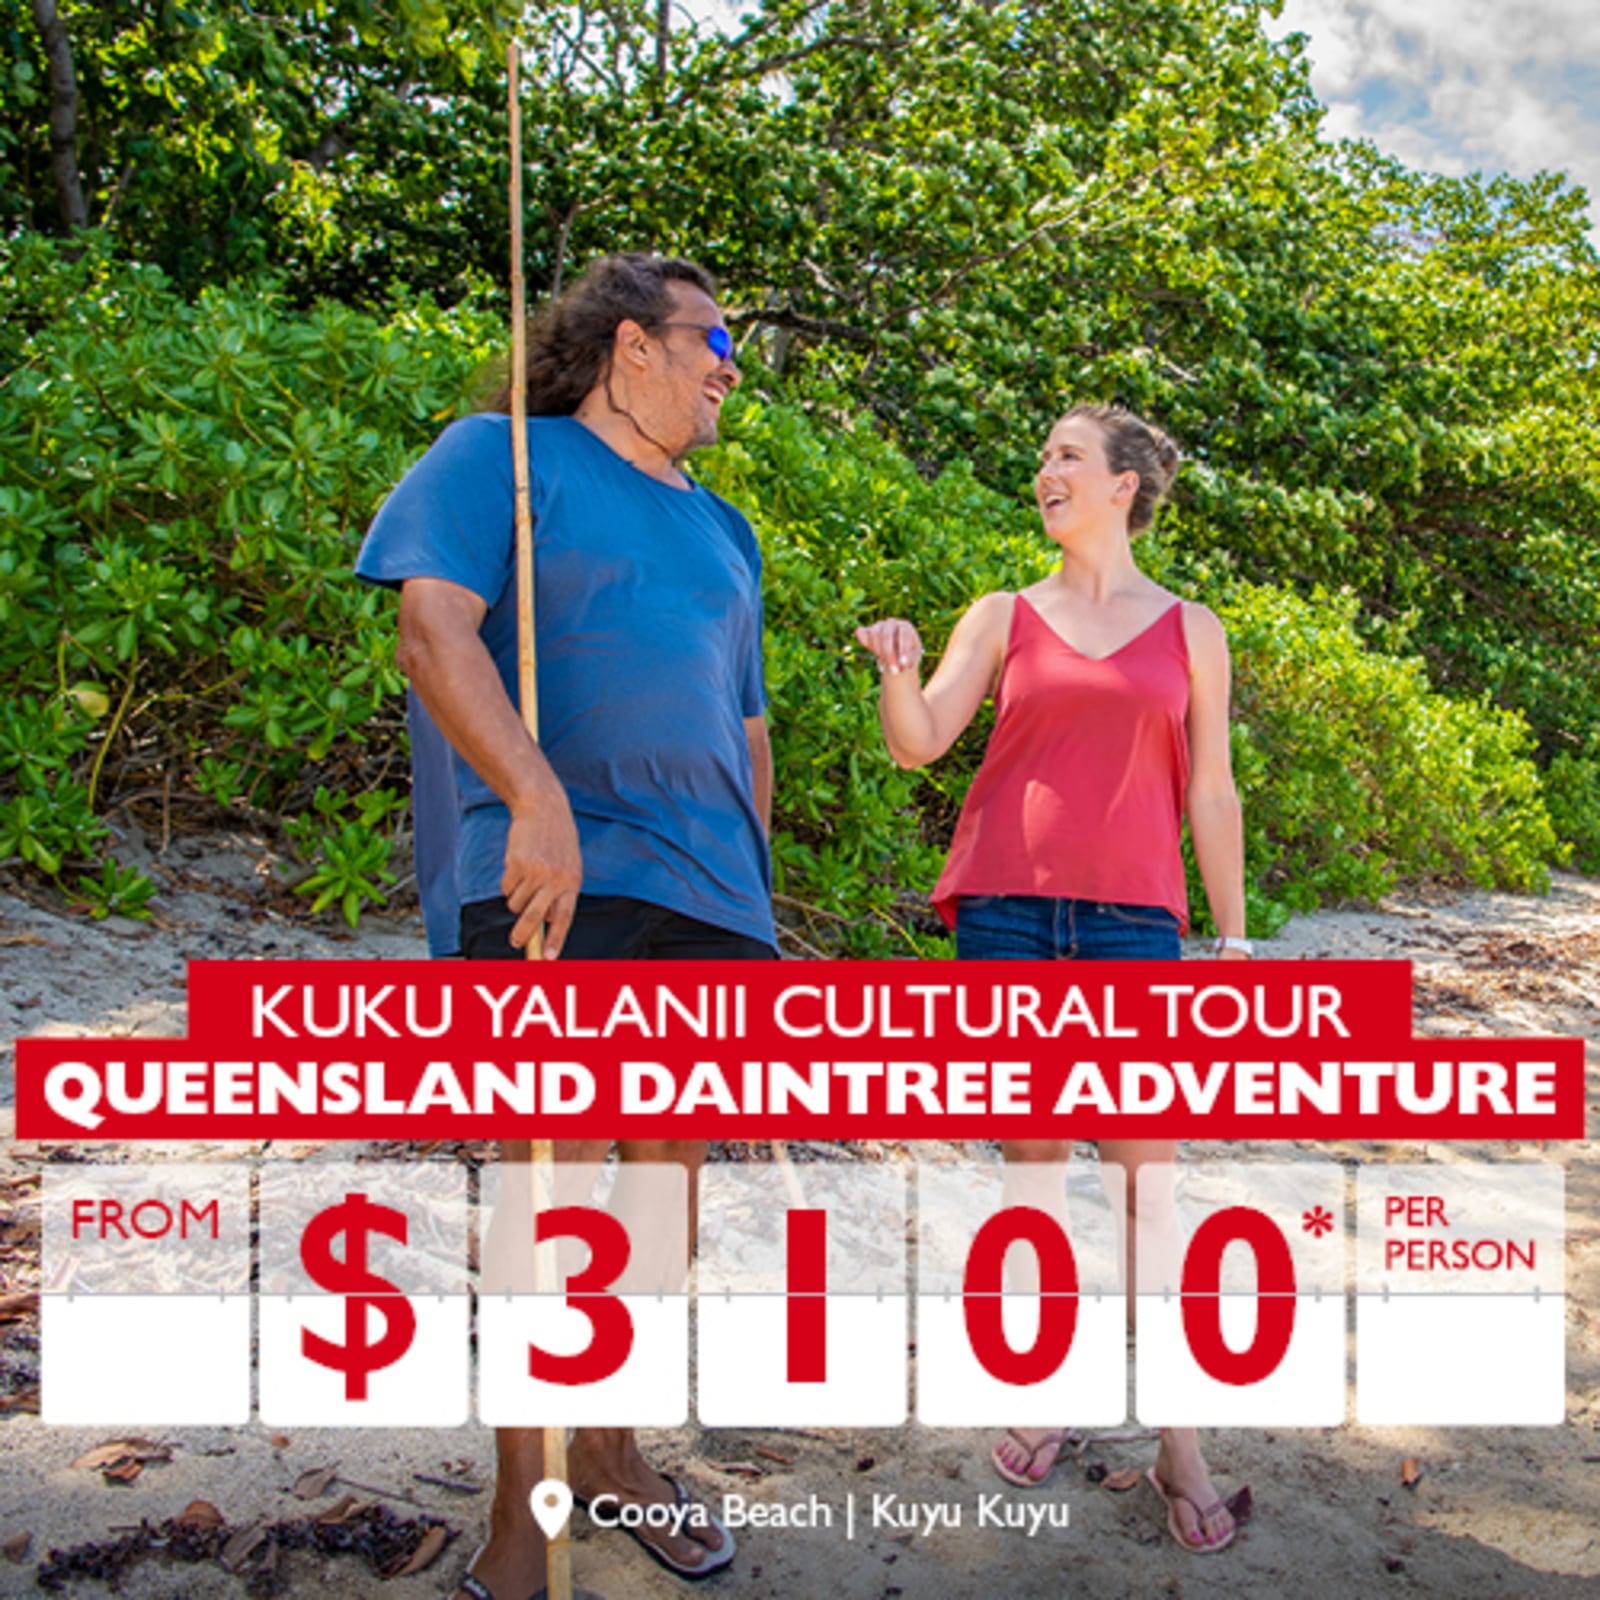 Kuku Yalanii Cultural Tour | Queensland Daintree Adventure from $3100* per person